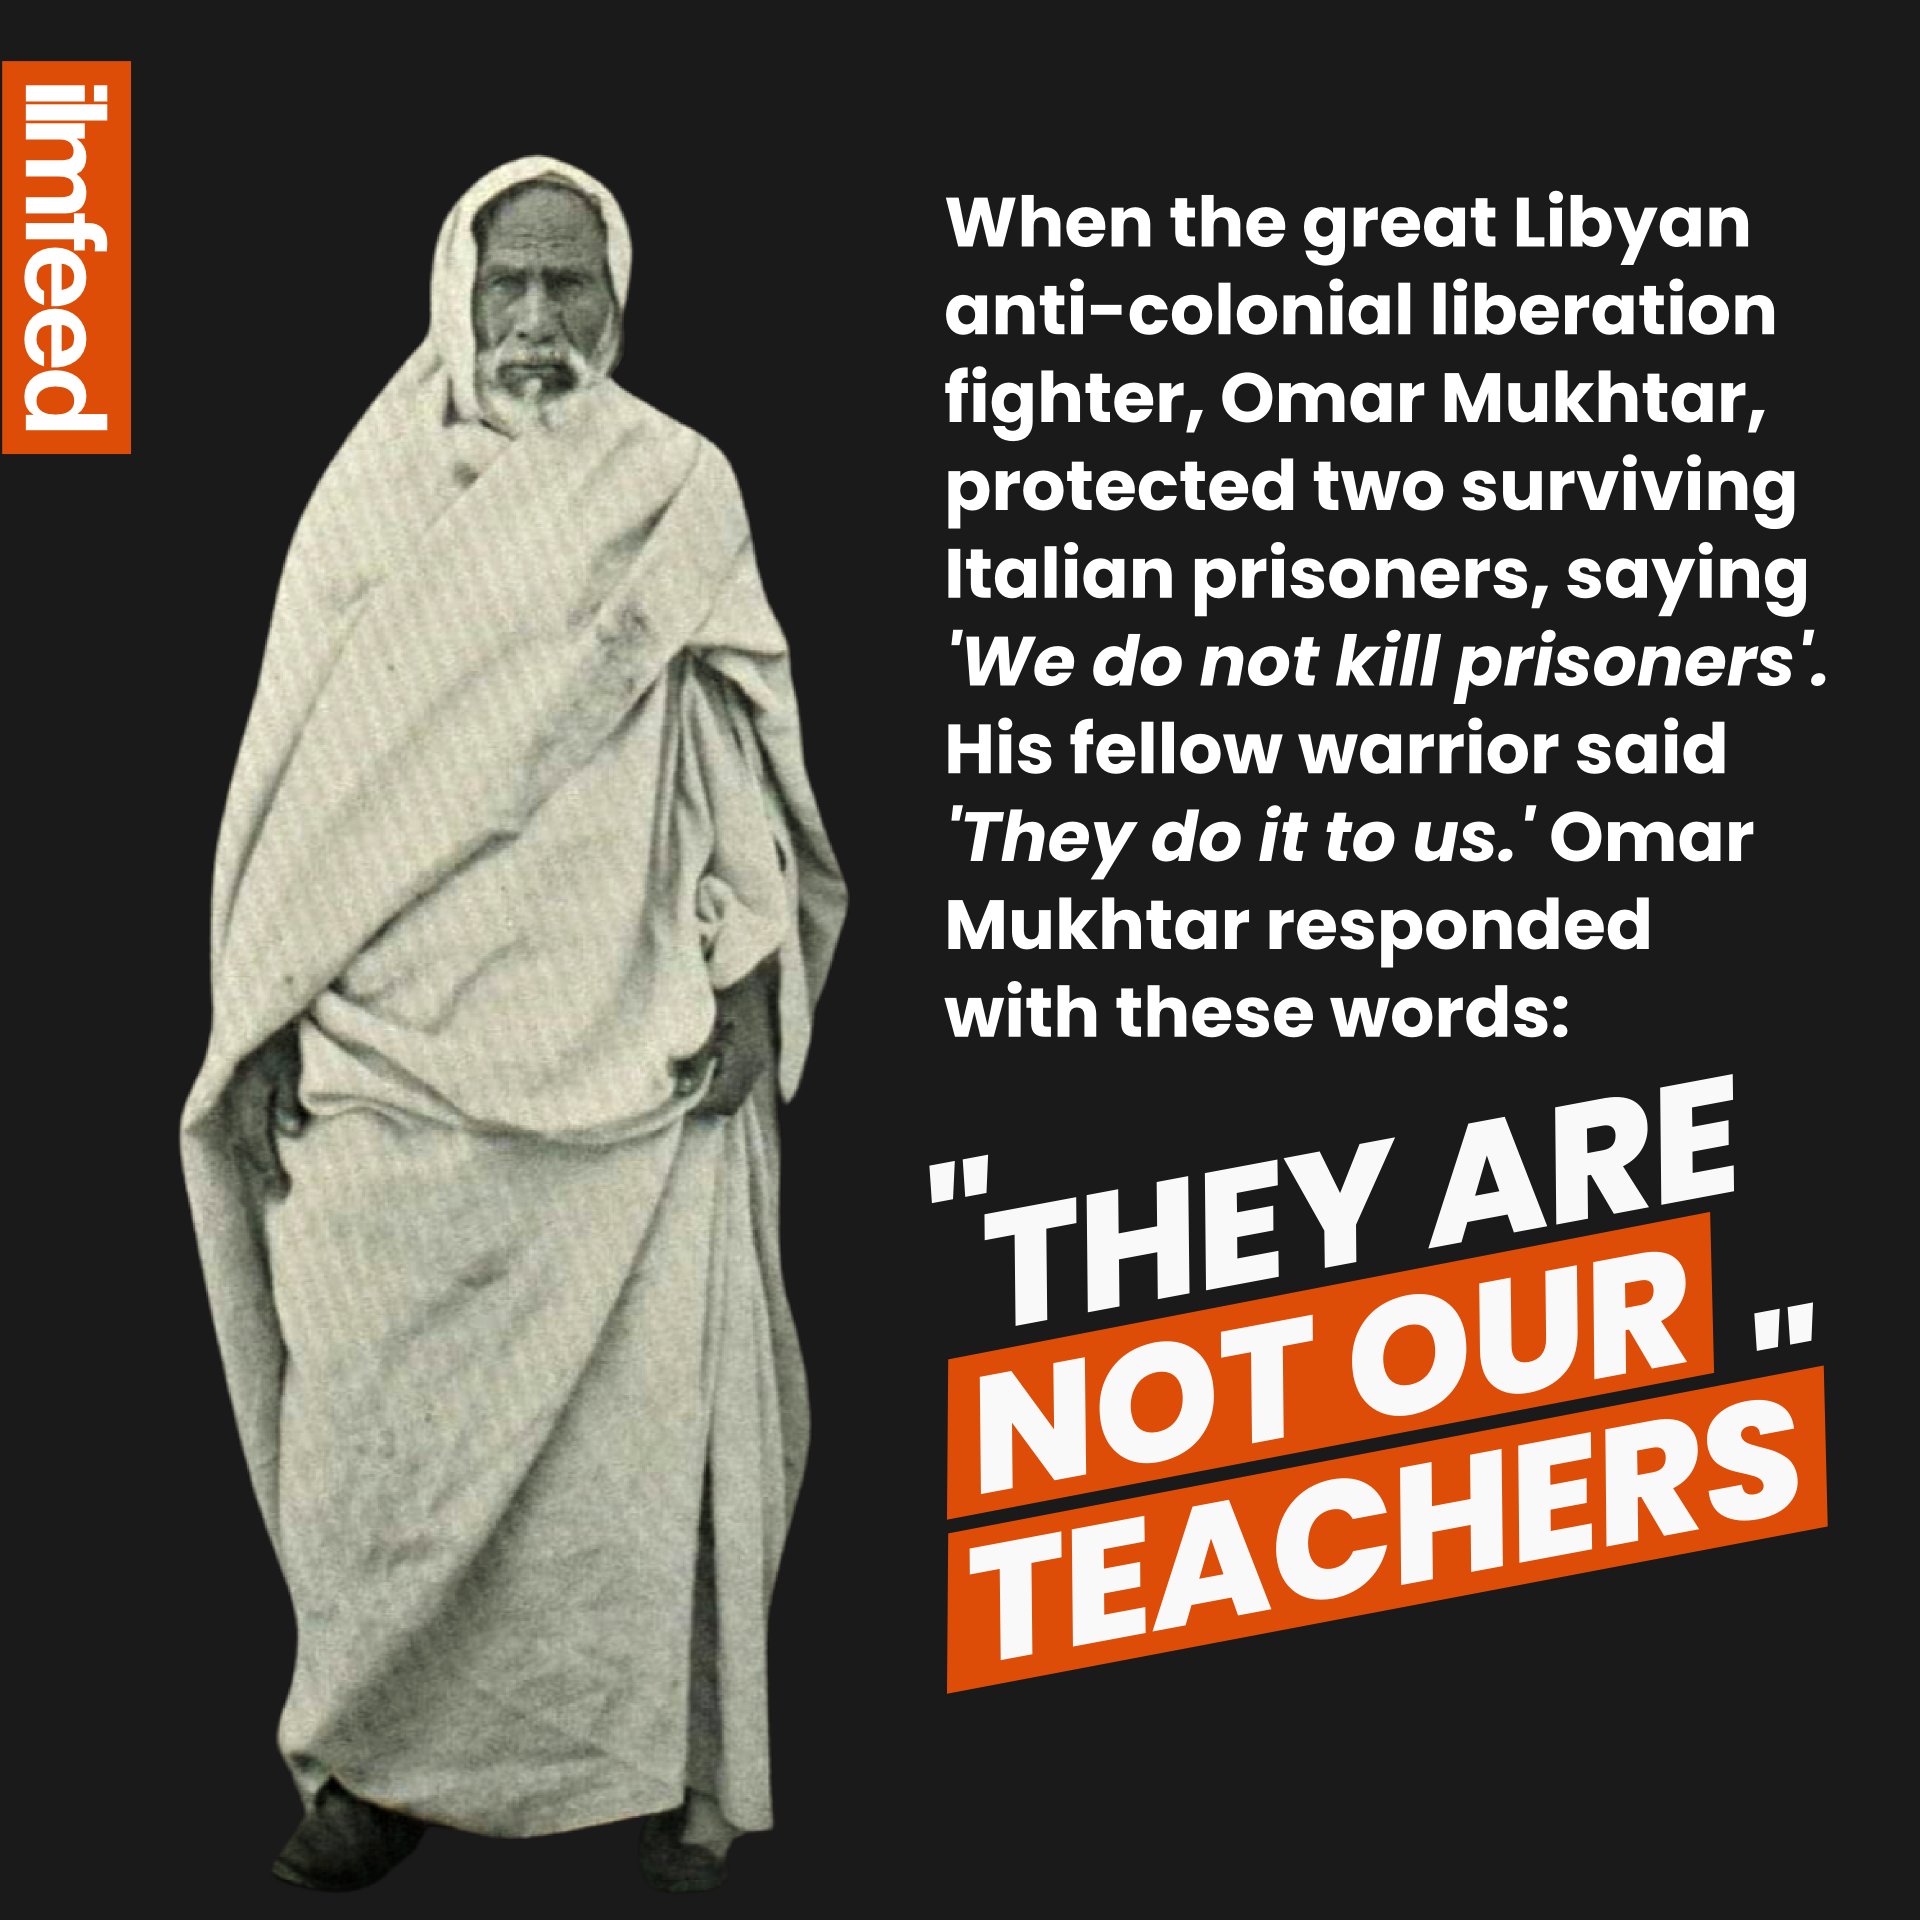 ilmfeed on Twitter: "They are not our teachers! <a href=